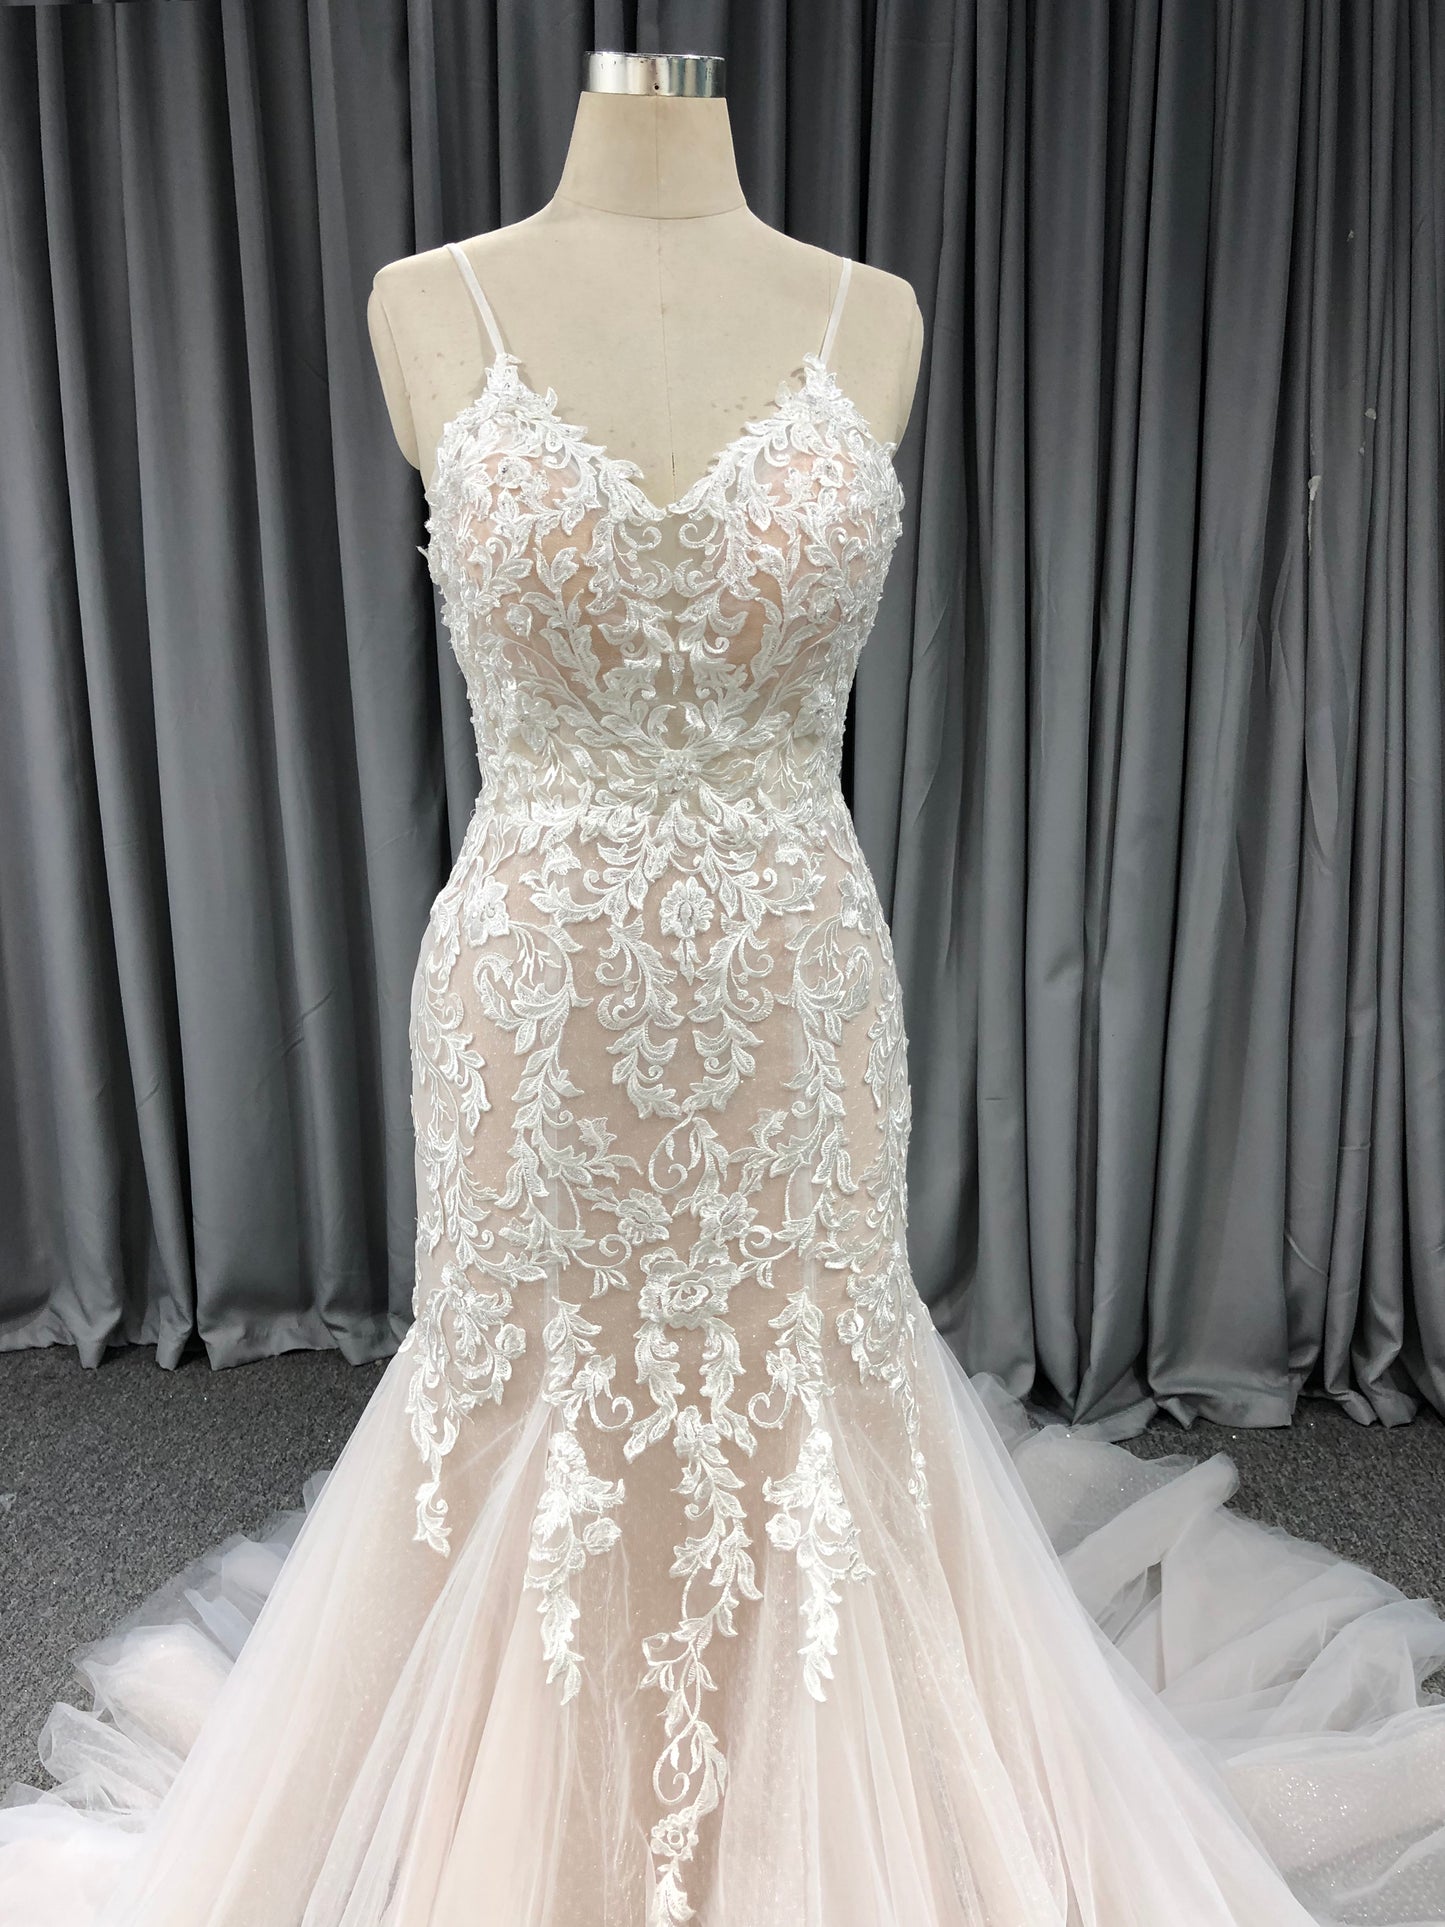 Mermaid Spaghetti Straps Court Train Wedding Dresses With Lace